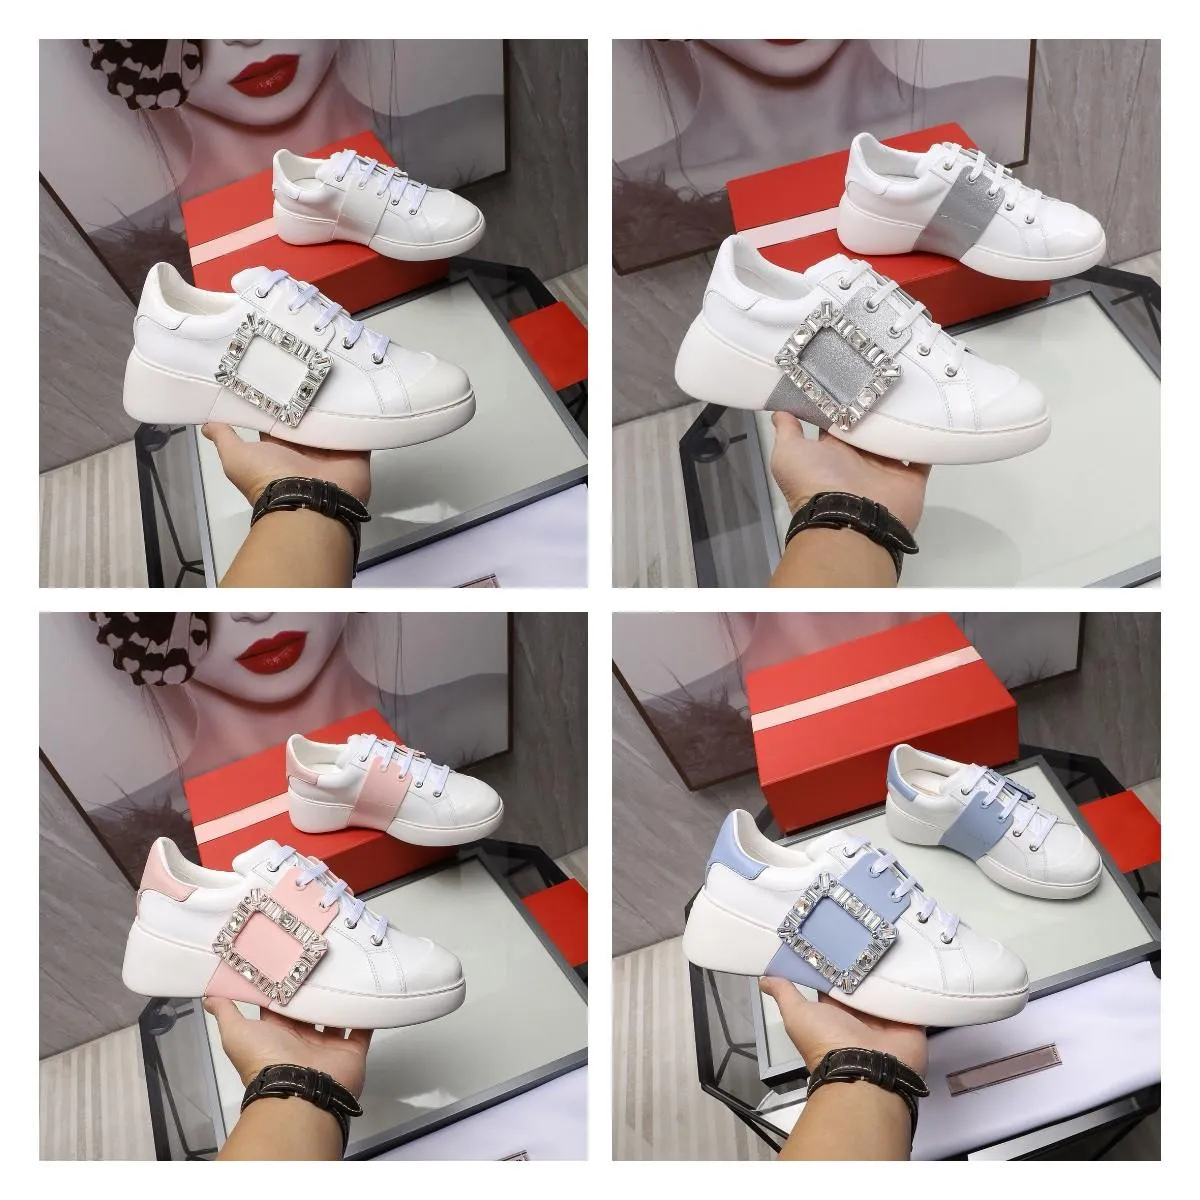 2021 Designer Luxury Women Casual Shoes Low-top Leather Sneaker Lady Calfskin Crystal Lace-up White Shoe Street Style Fashion Comfort Top Quality With Box Size 35-40